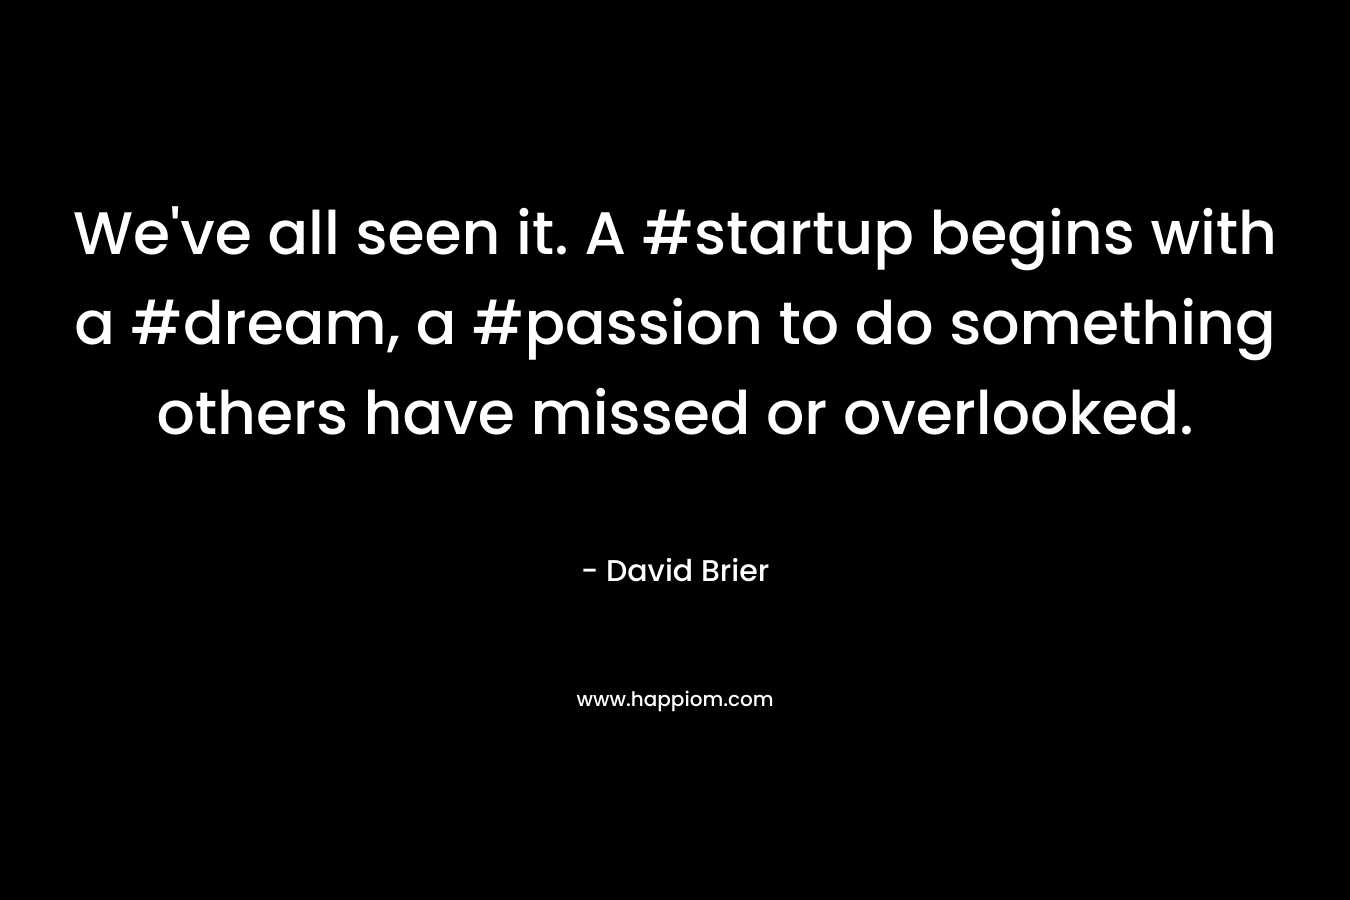 We’ve all seen it. A #startup begins with a #dream, a #passion to do something others have missed or overlooked. – David Brier